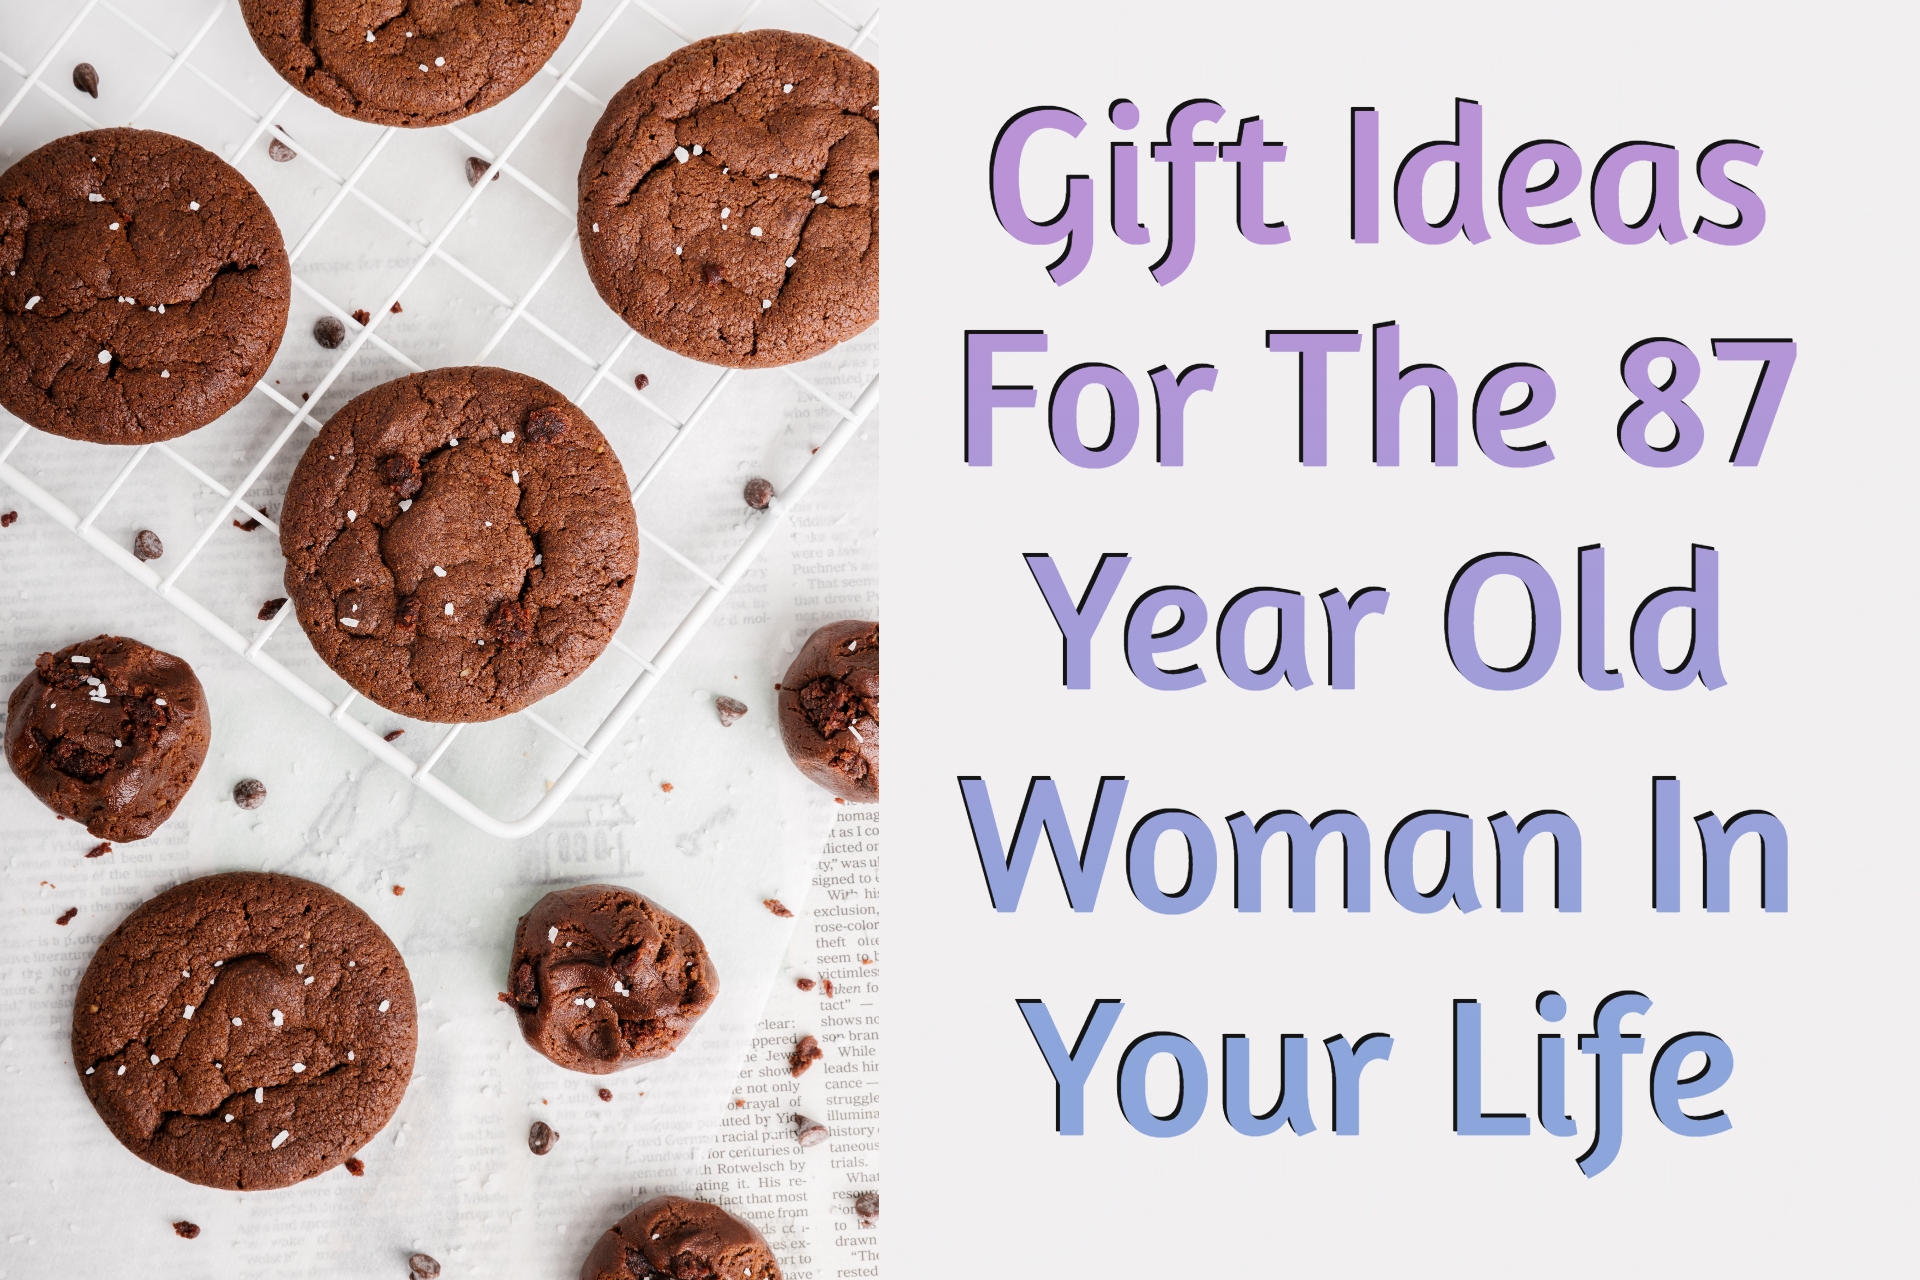 Cover image of gift ideas for 87-year-old woman by Giftsedge